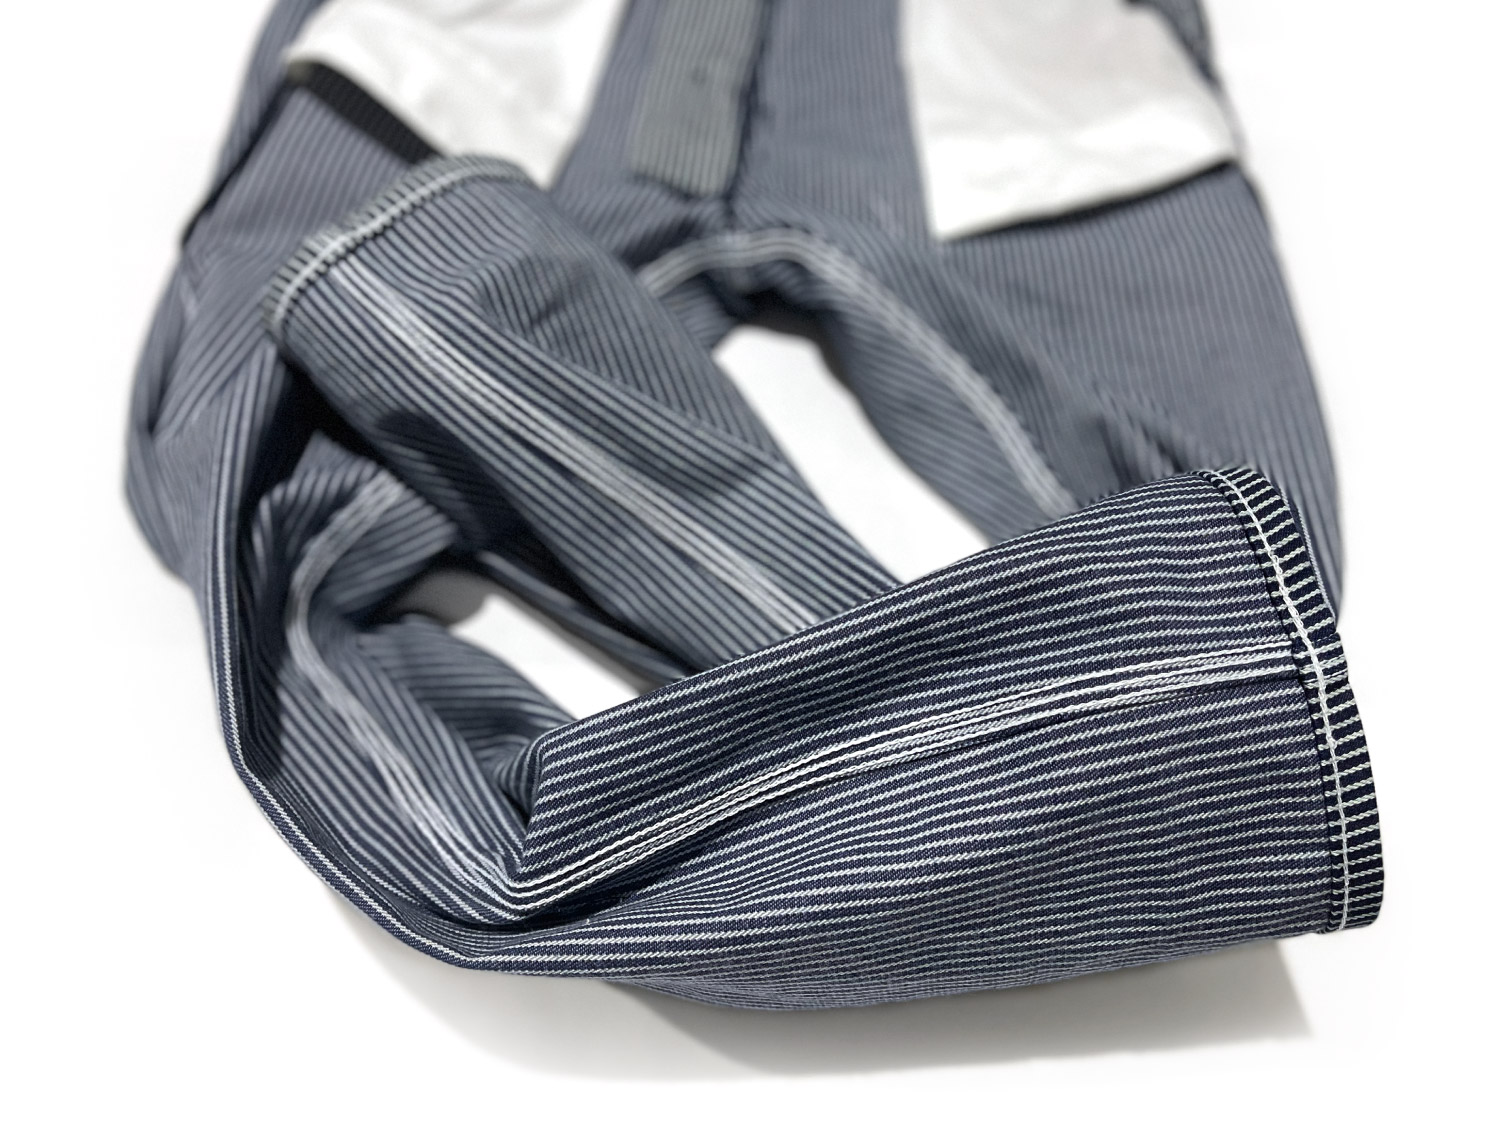 The inside view shows how overalls with 3-needle chain stitch sewing are tapered with same-as-original construction.